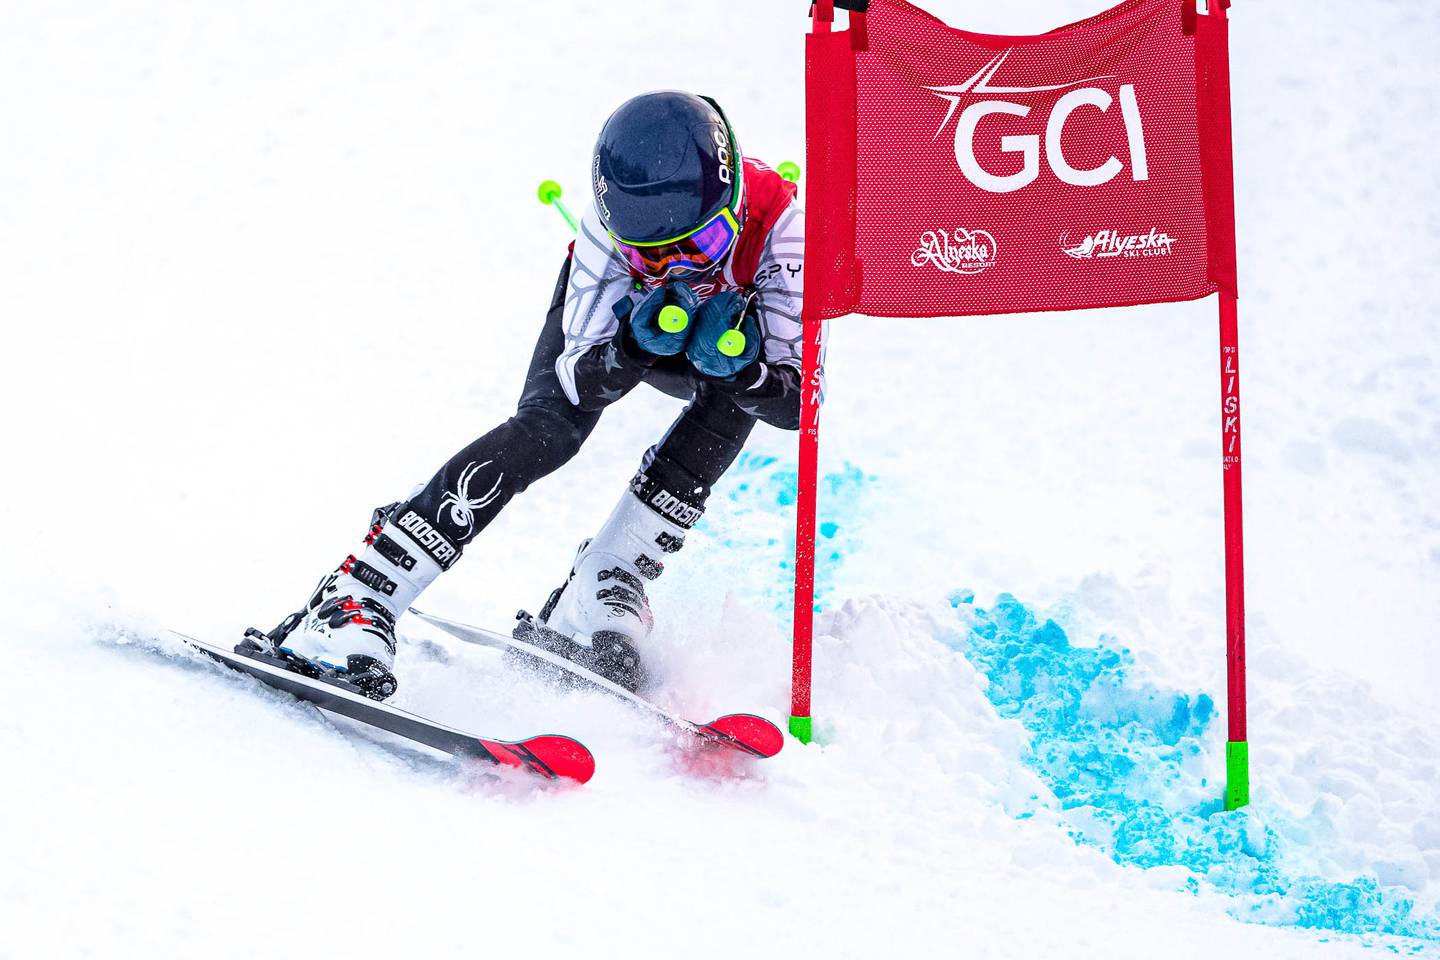 Jaxon Murphy takes a direct line into the finish Friday during Coca-Cola Classic giant slalom racing at Alyeska. (Courtesy Bob Eastaugh)